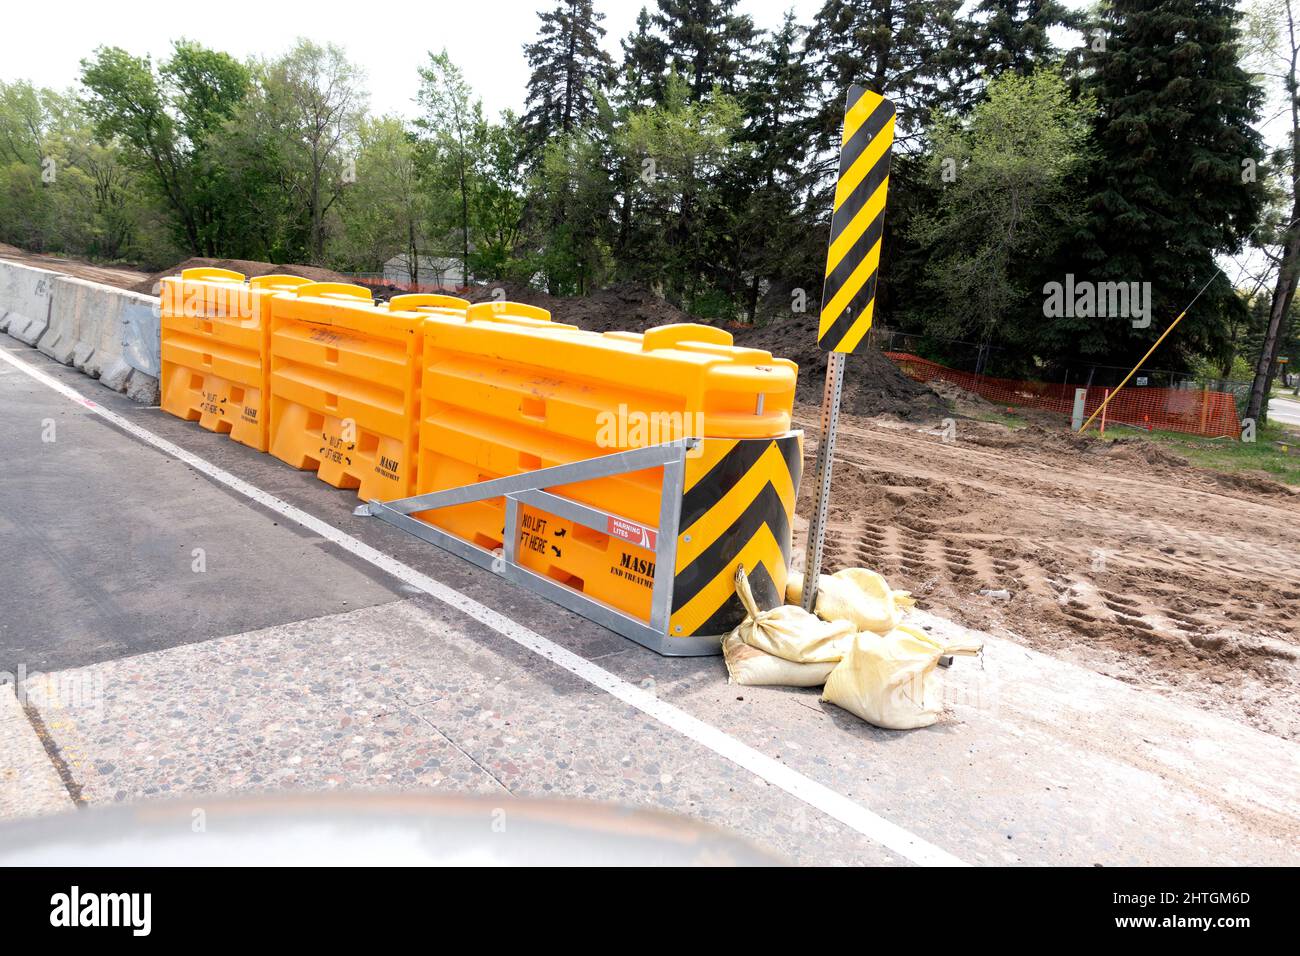 Highway yellow buffer cushions for separating cars from the concrete barriers during road construction. Nisswa Minnesota MN USA Stock Photo